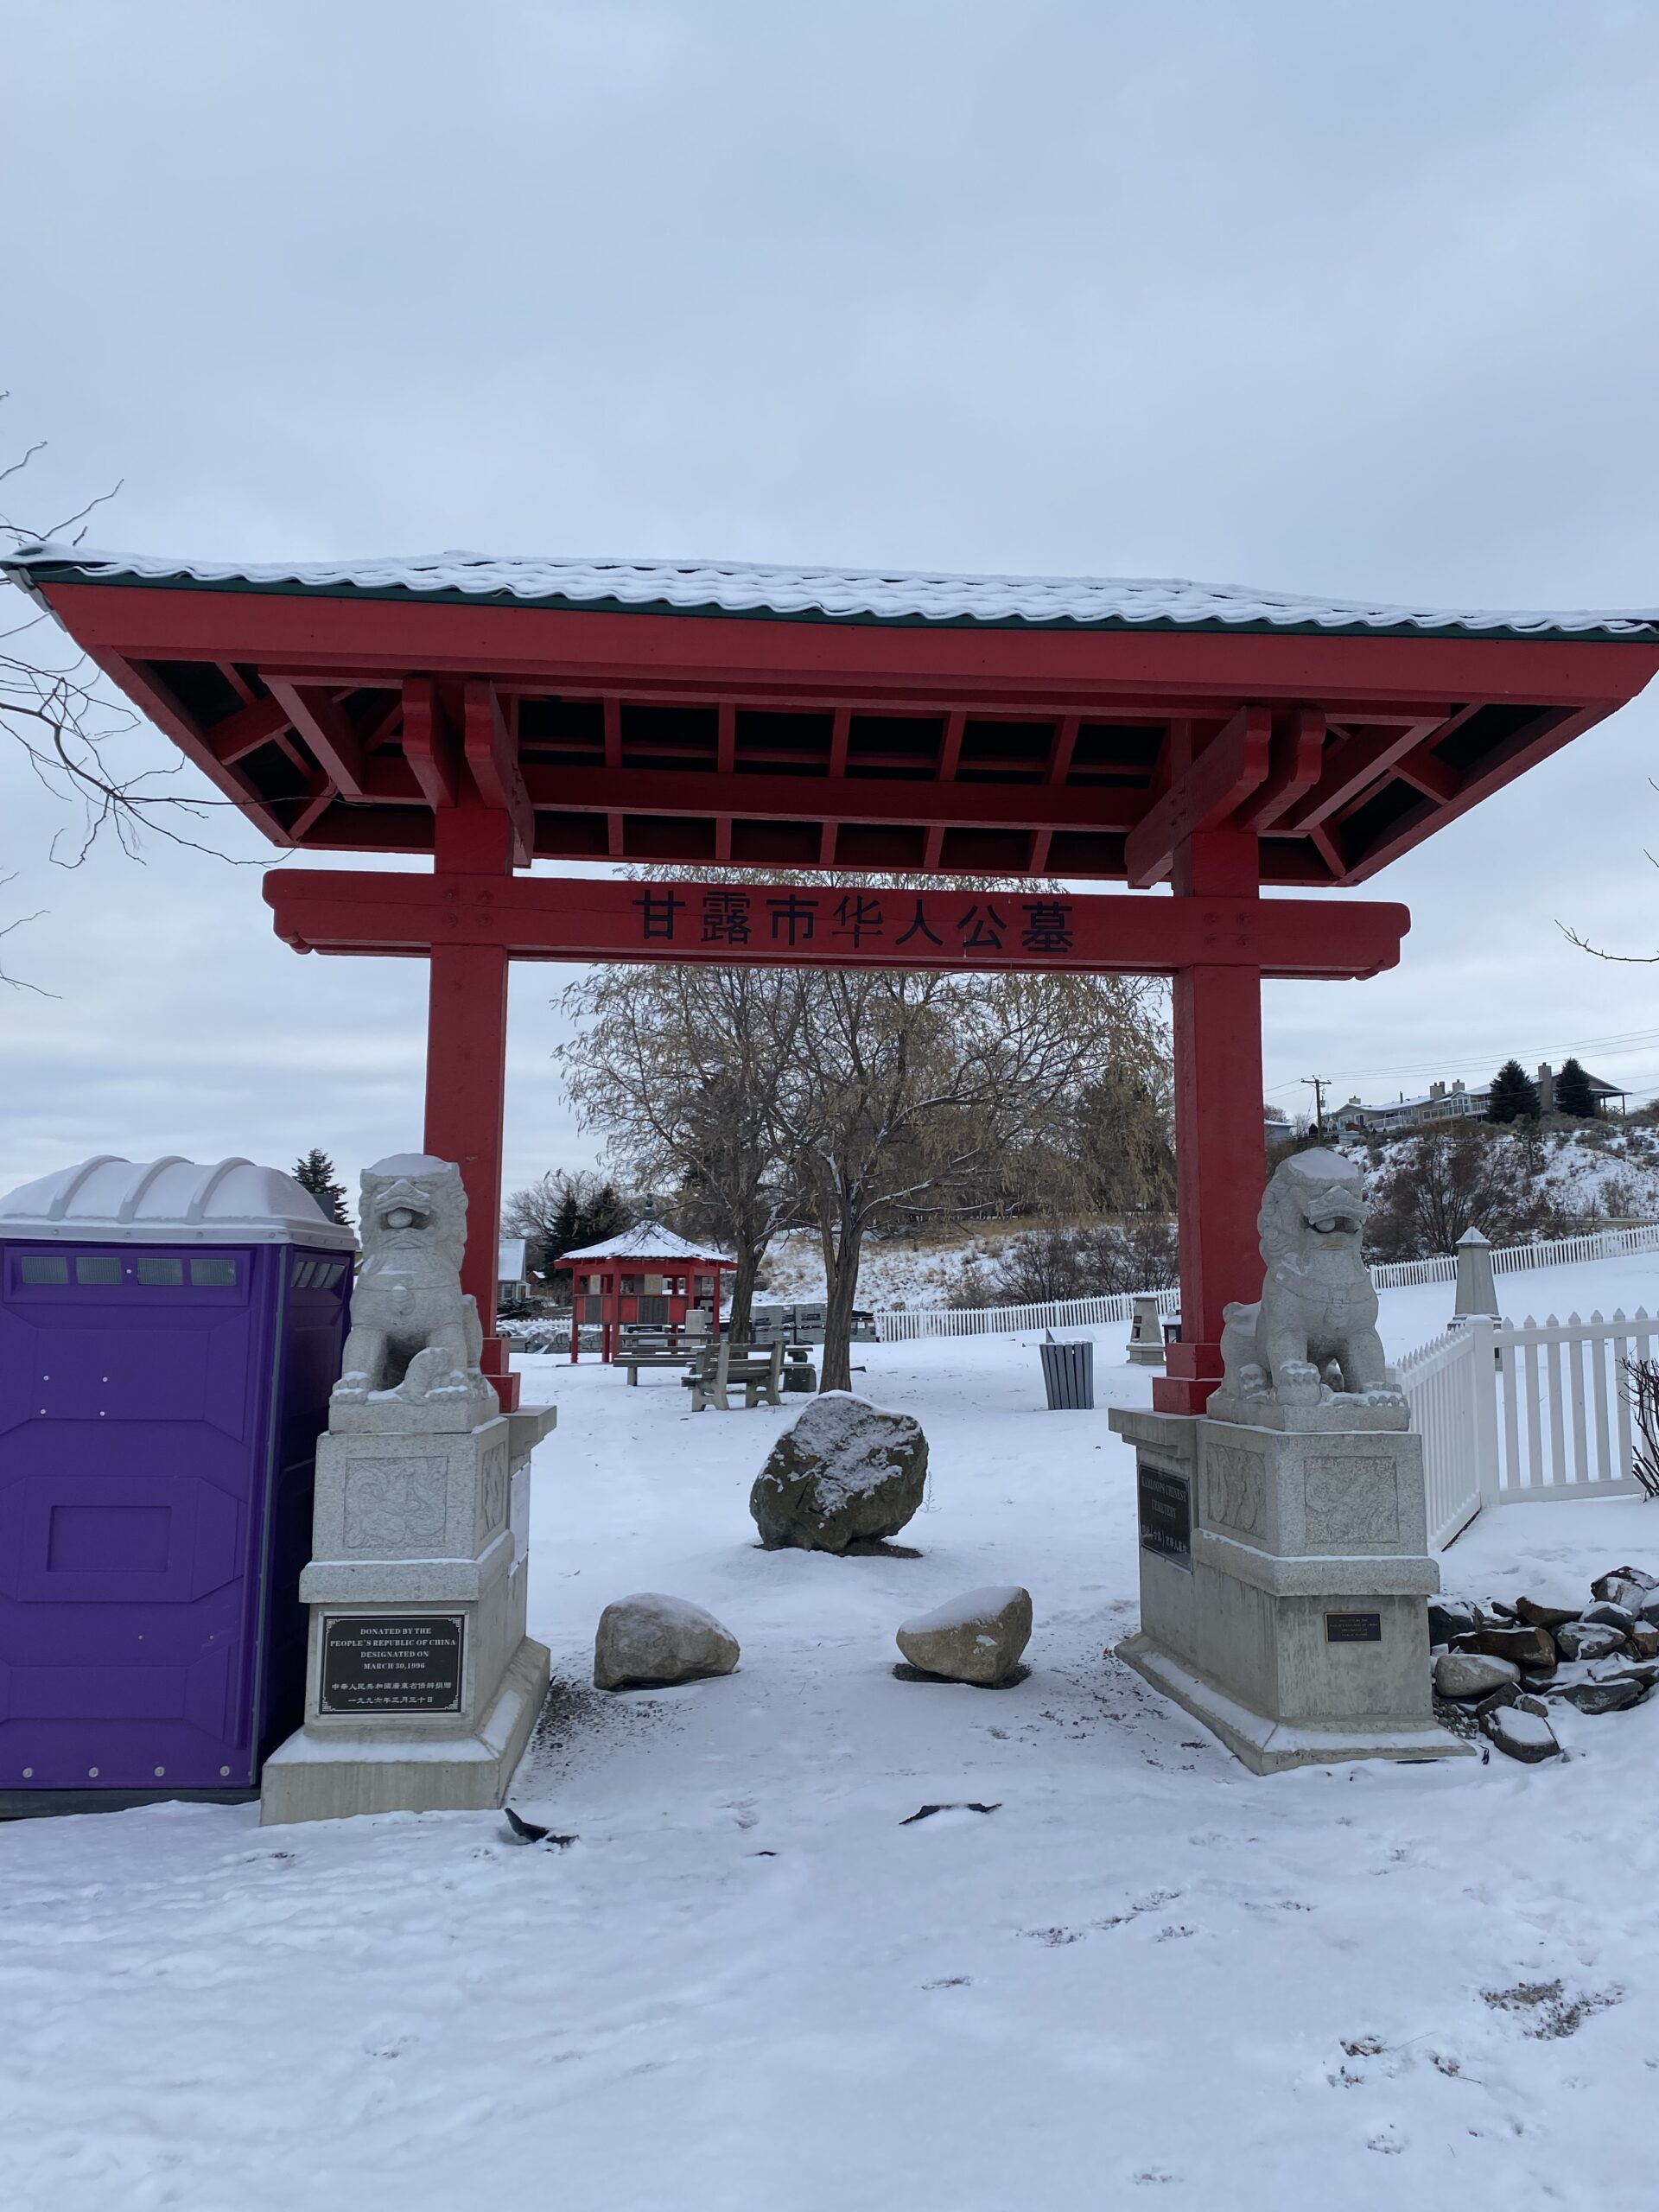 Entrance to the Kamloops Chinese Cemetery